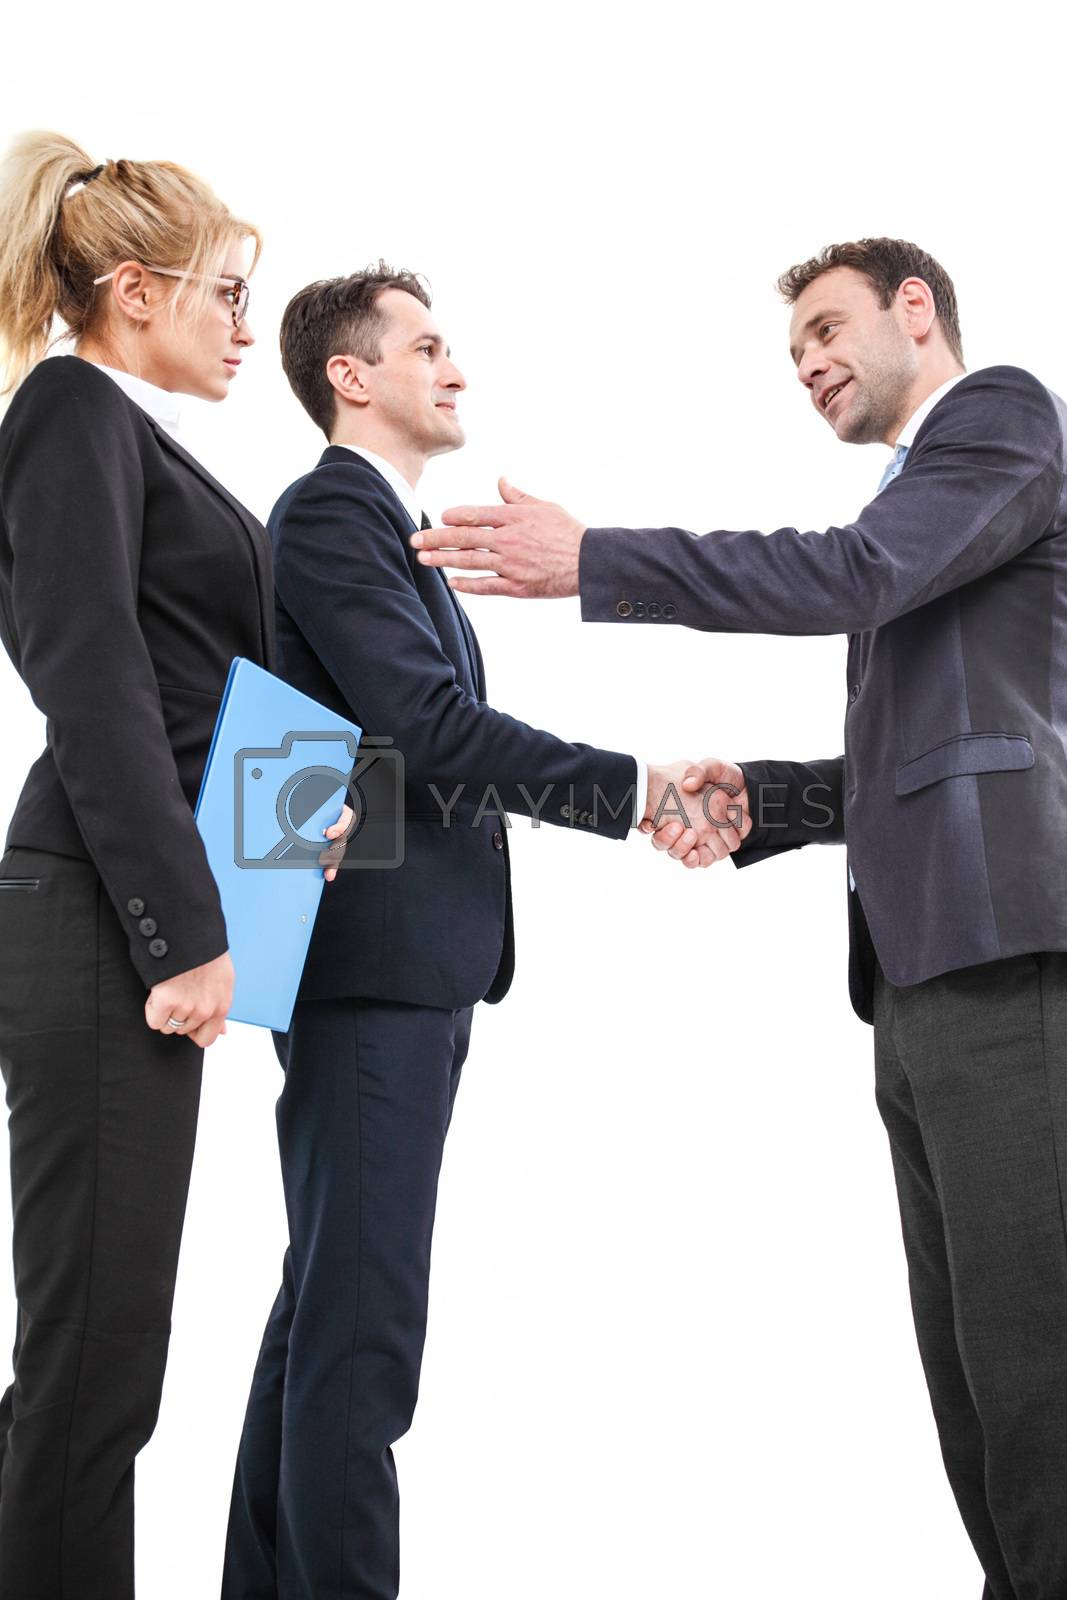 Royalty free image of Business people shaking hands by ALotOfPeople